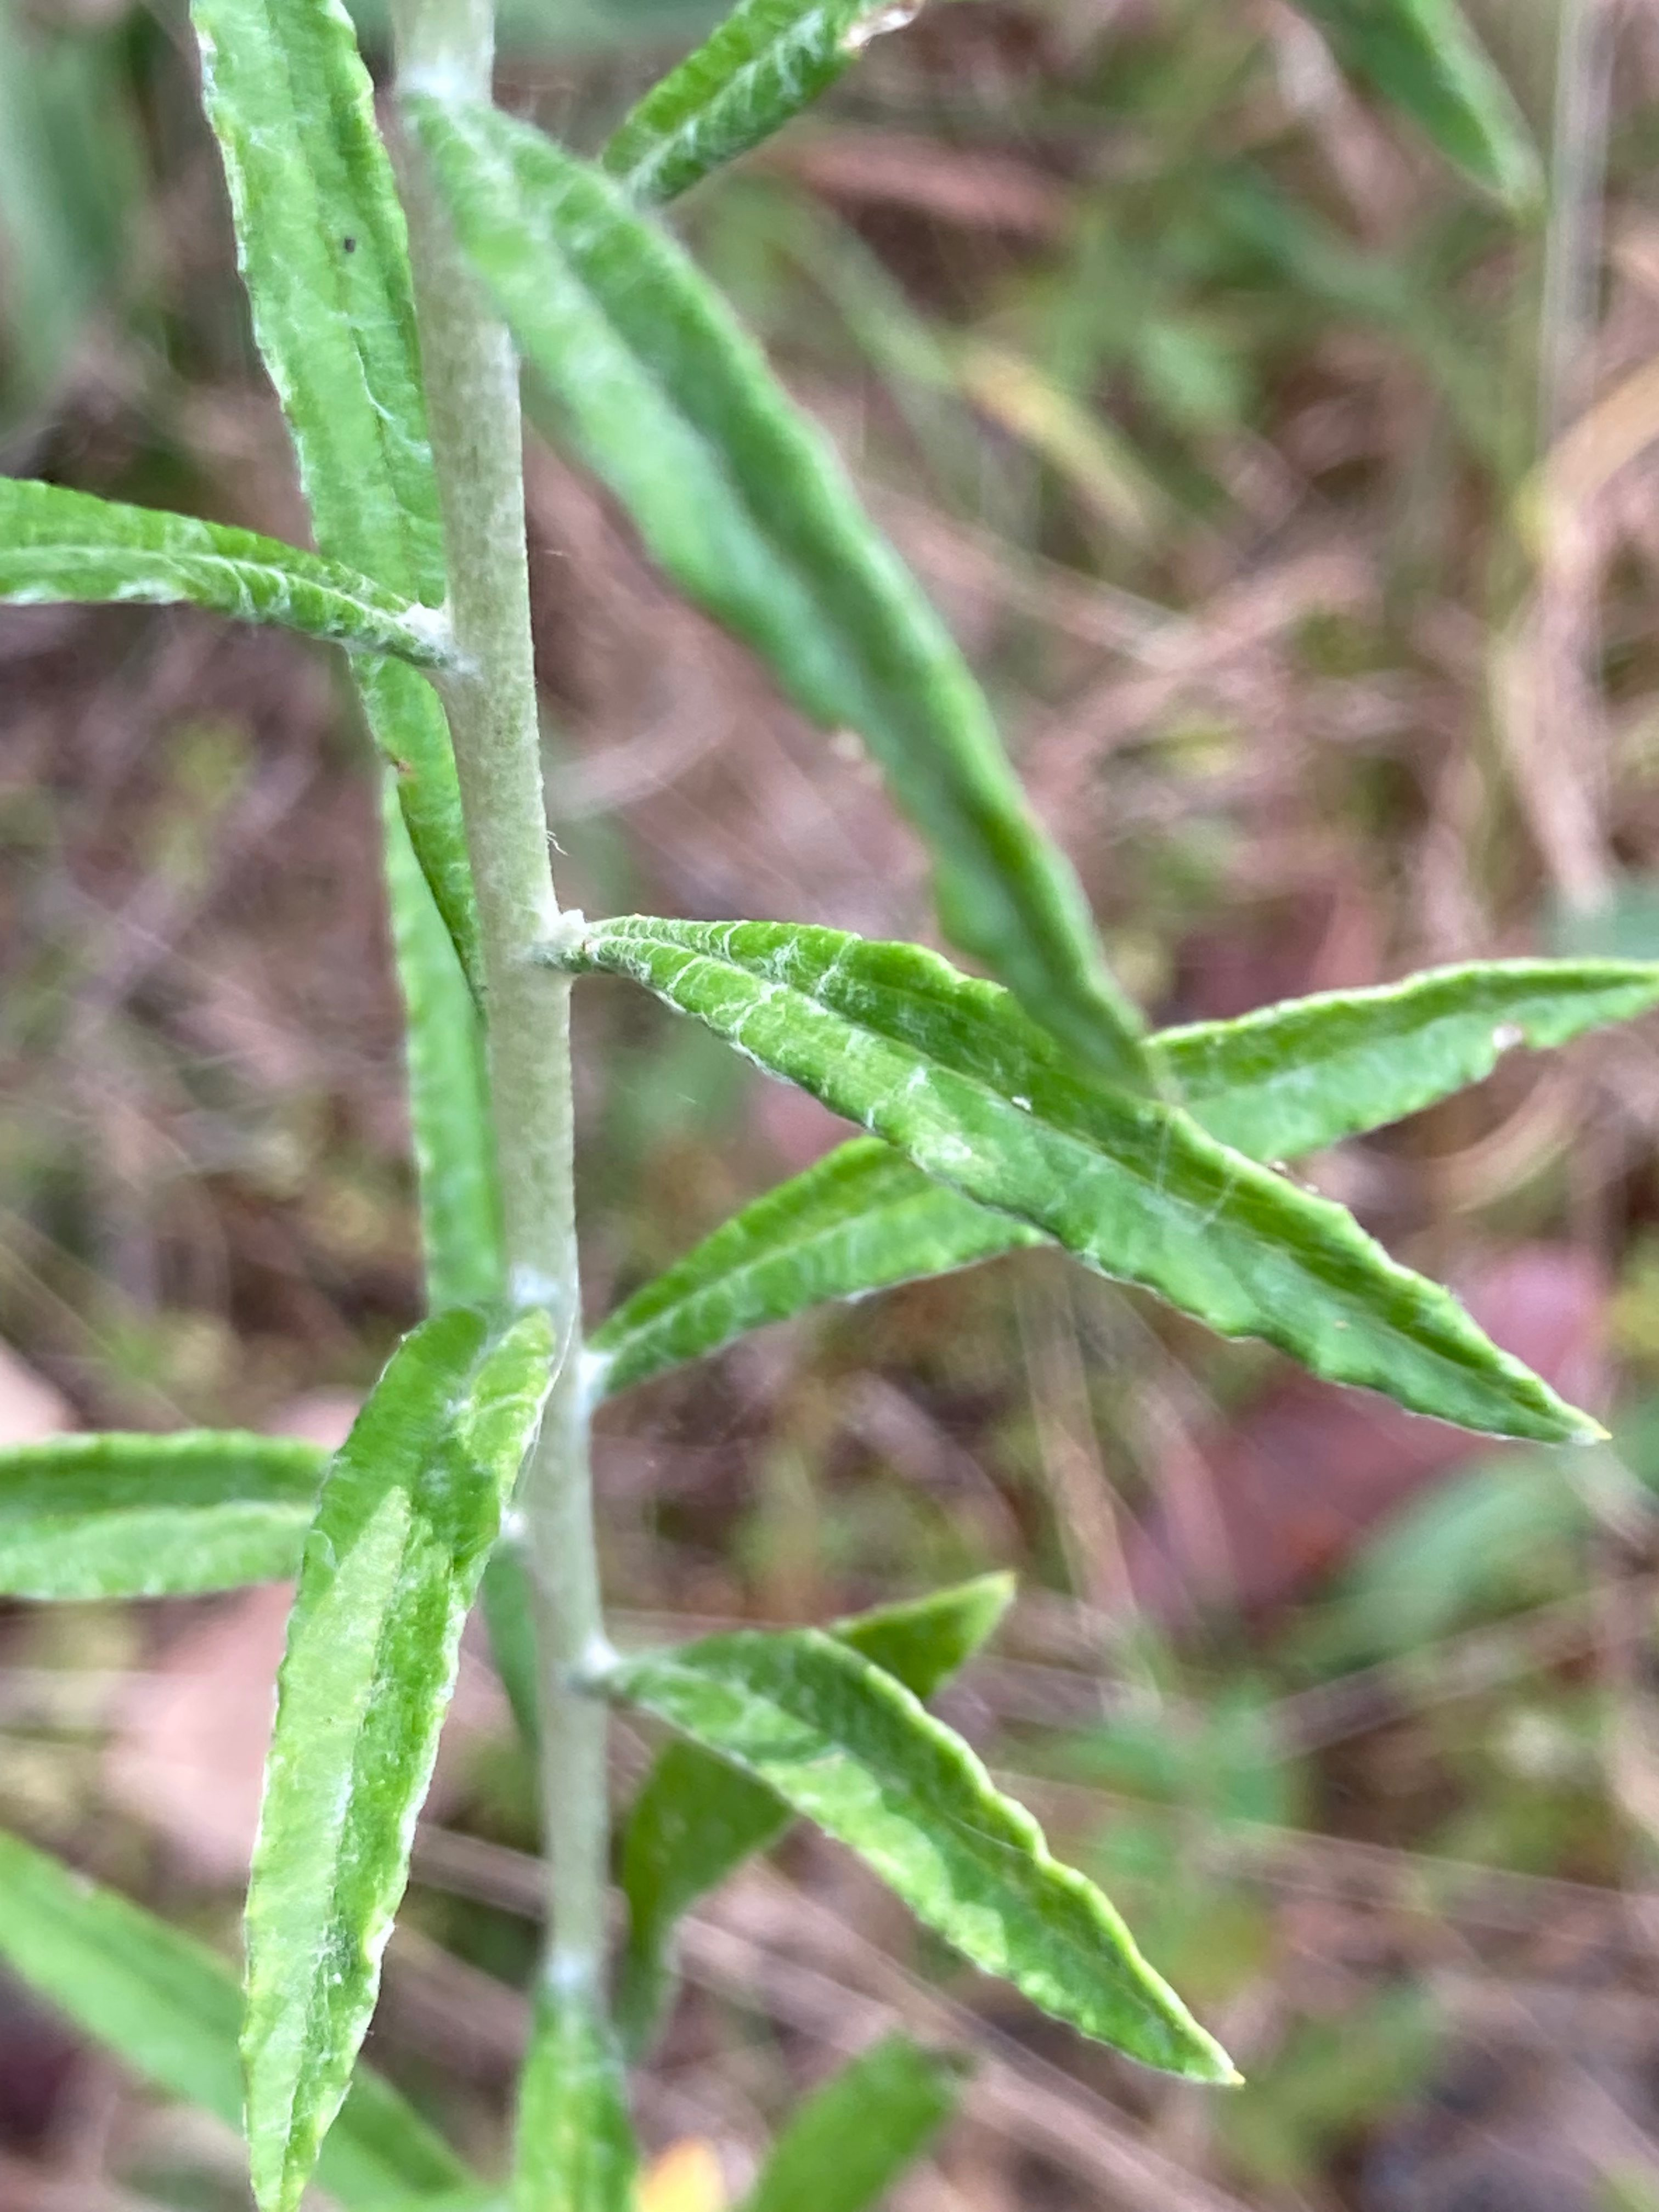 The Scientific Name is Pseudognaphalium obtusifolium [= Gnaphalium obtusifolium]. You will likely hear them called Fragrant Rabbit-tobacco,Rabbit-tobacco, Sweet Everlasting, Old Field Balsam, Eastern Rabbit-tobacco, Fragrant Cudweed. This picture shows the The sessile linear leaves with wavy margins, are alternately arranged on the whitish green stems which are covered with appressed woolly hairs. The lower surface of the leaves also have white hairs. of Pseudognaphalium obtusifolium [= Gnaphalium obtusifolium]